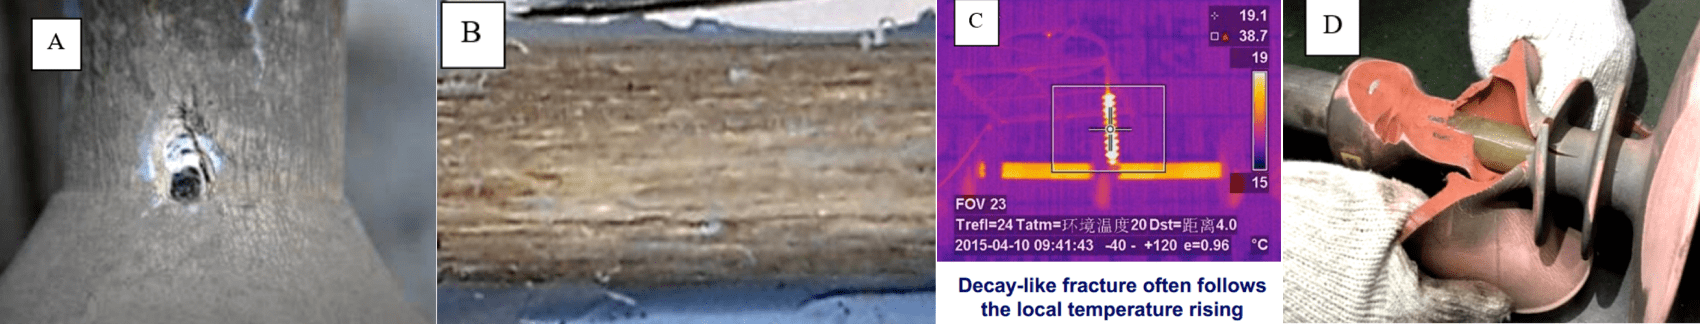 Fig. 3: Illustration of Chinese data on 'decay-like fractures'. A. Punctures in housing covering the internal 'decay-like fractures'; B. Appearance of fiberglass rod; C. Detection of internal failure by IR; D. Poor adhesion believed to be root cause of damage. CLICK TO ENLARGE